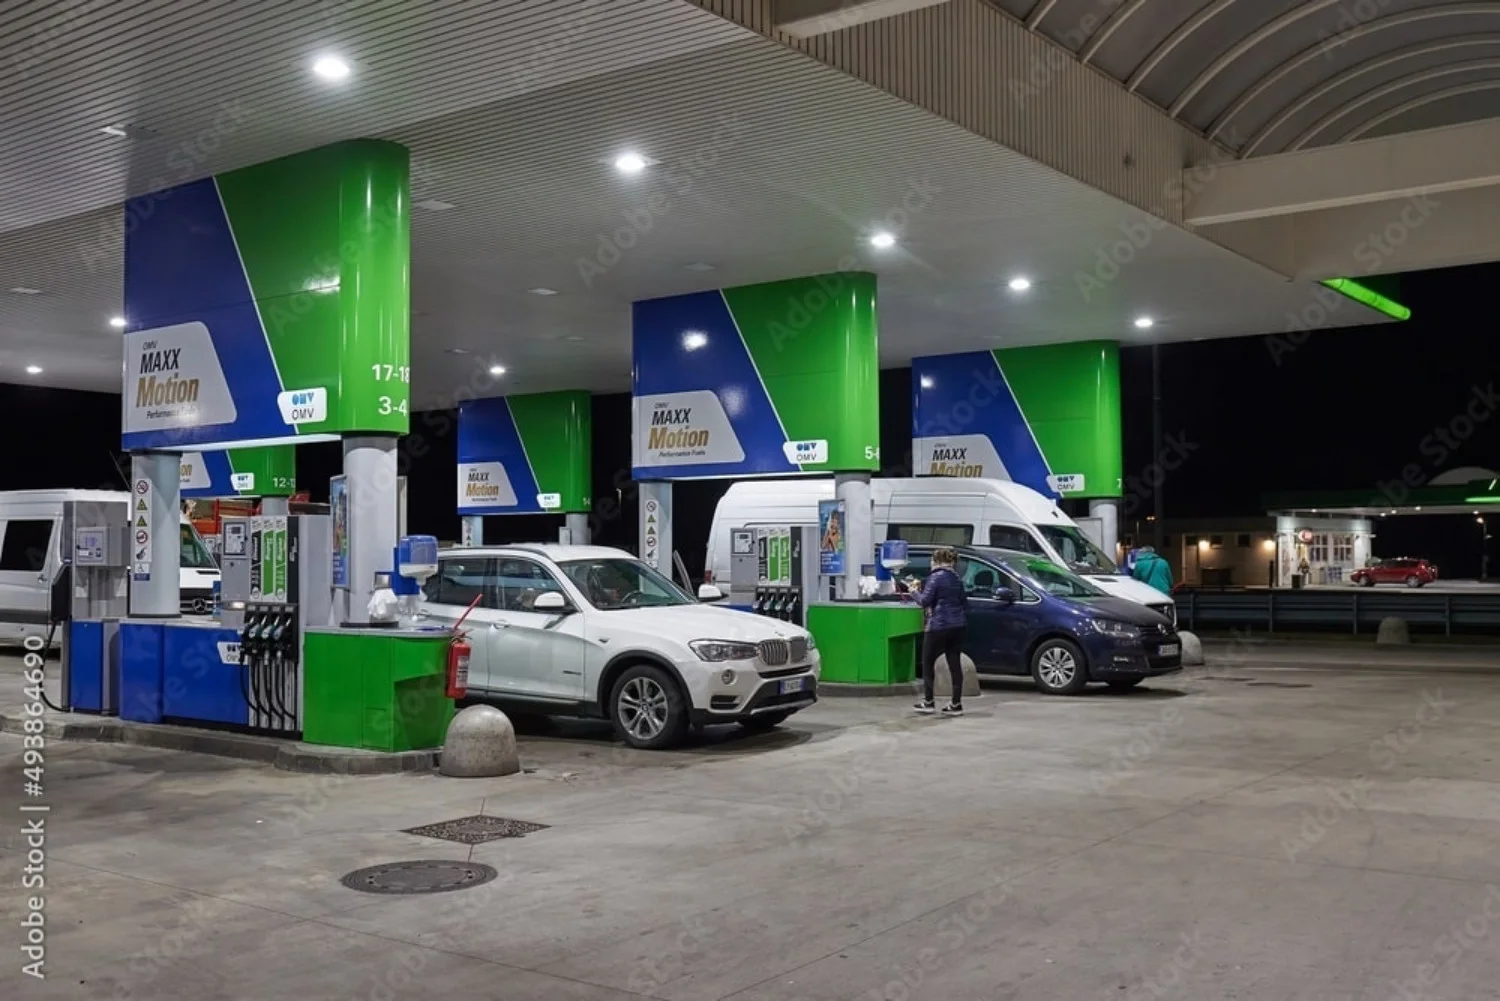 Like their competitors, many of the OMV Service Stations also have mechanics in attendance, ready to assist with any technical problems in professional workshops.